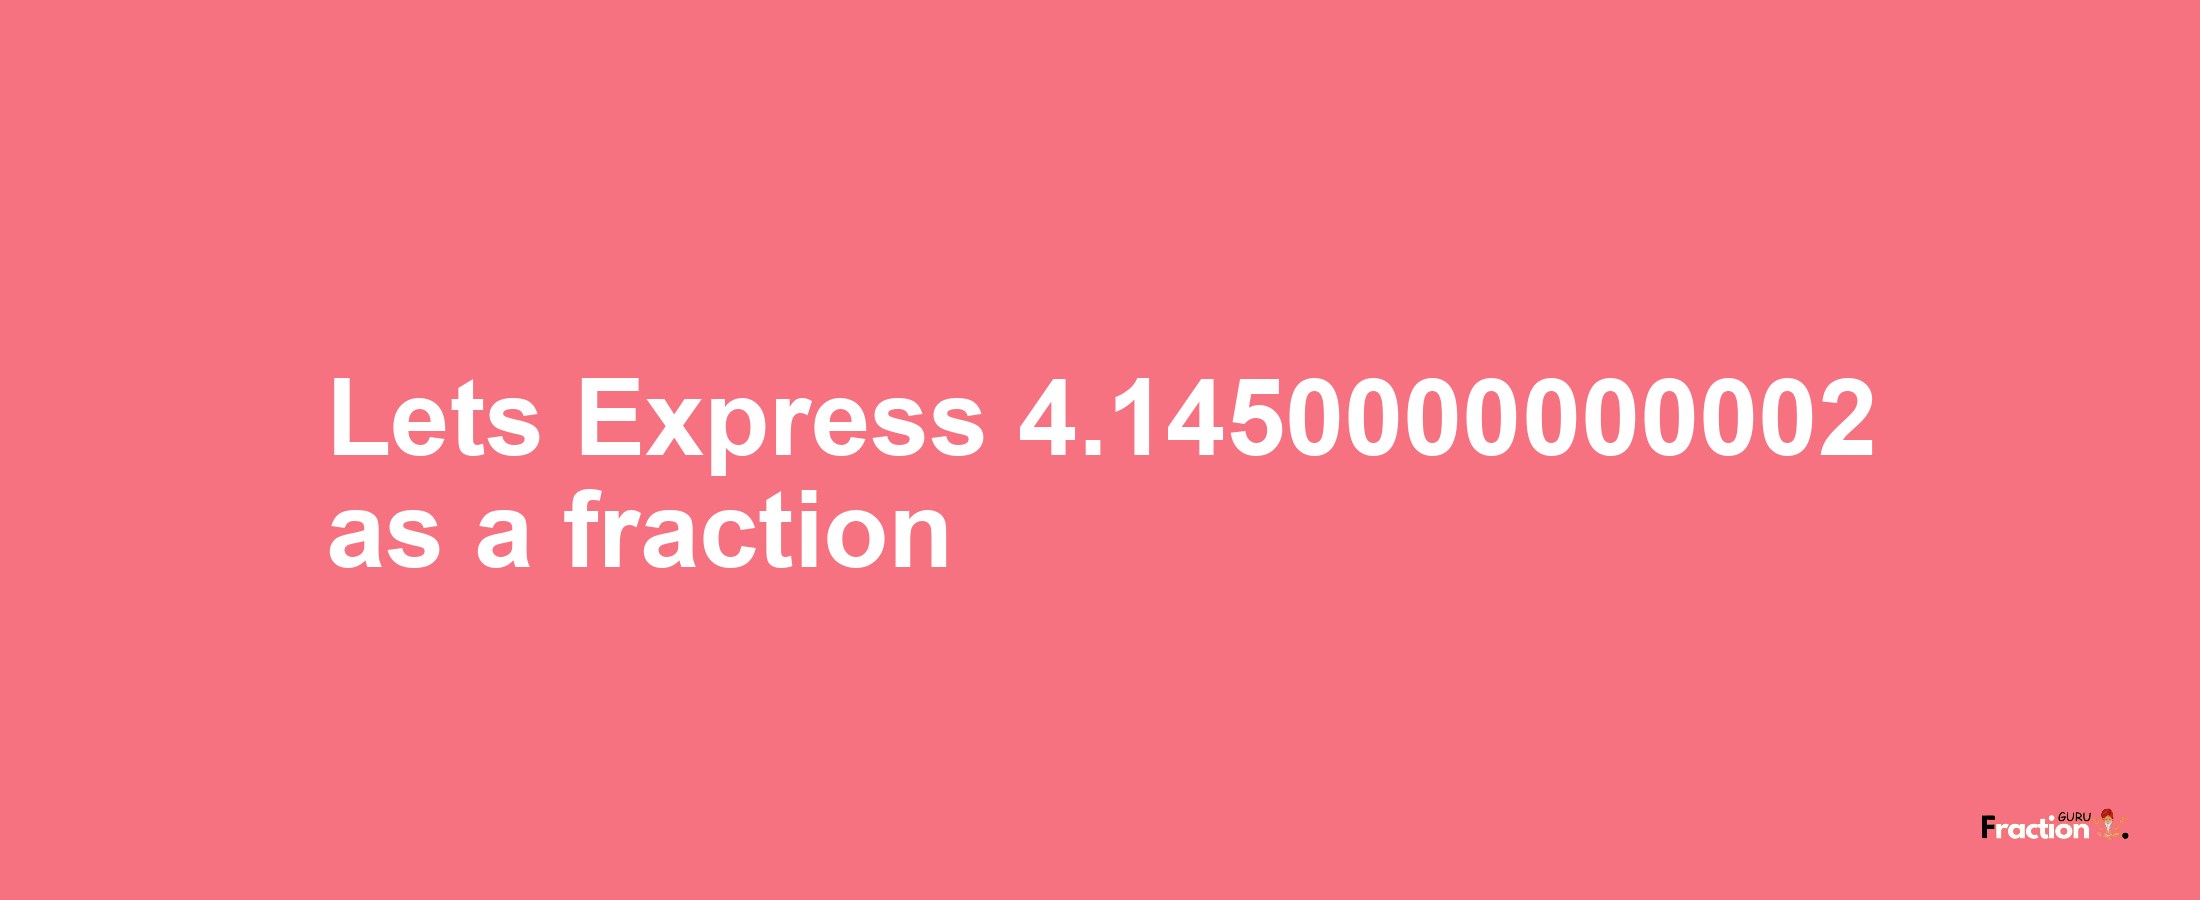 Lets Express 4.1450000000002 as afraction